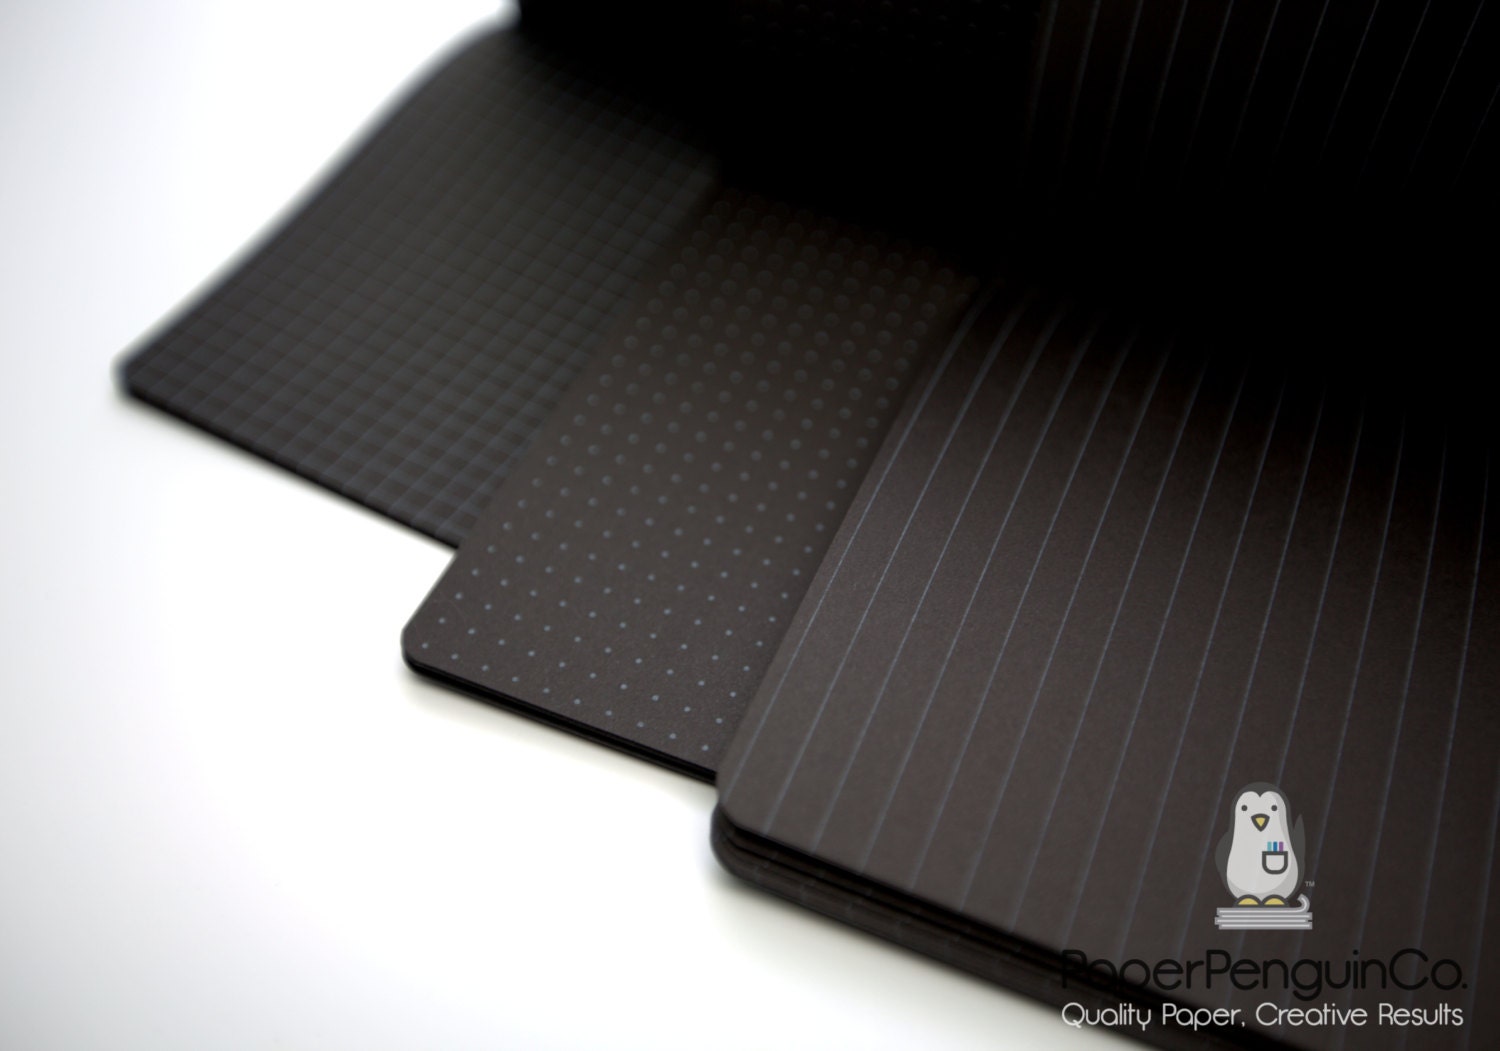 Black Paper Journal: Wide Ruled Lined Paper, Black Pages & white Lines, Black Leather Texture Cover, 100 pages